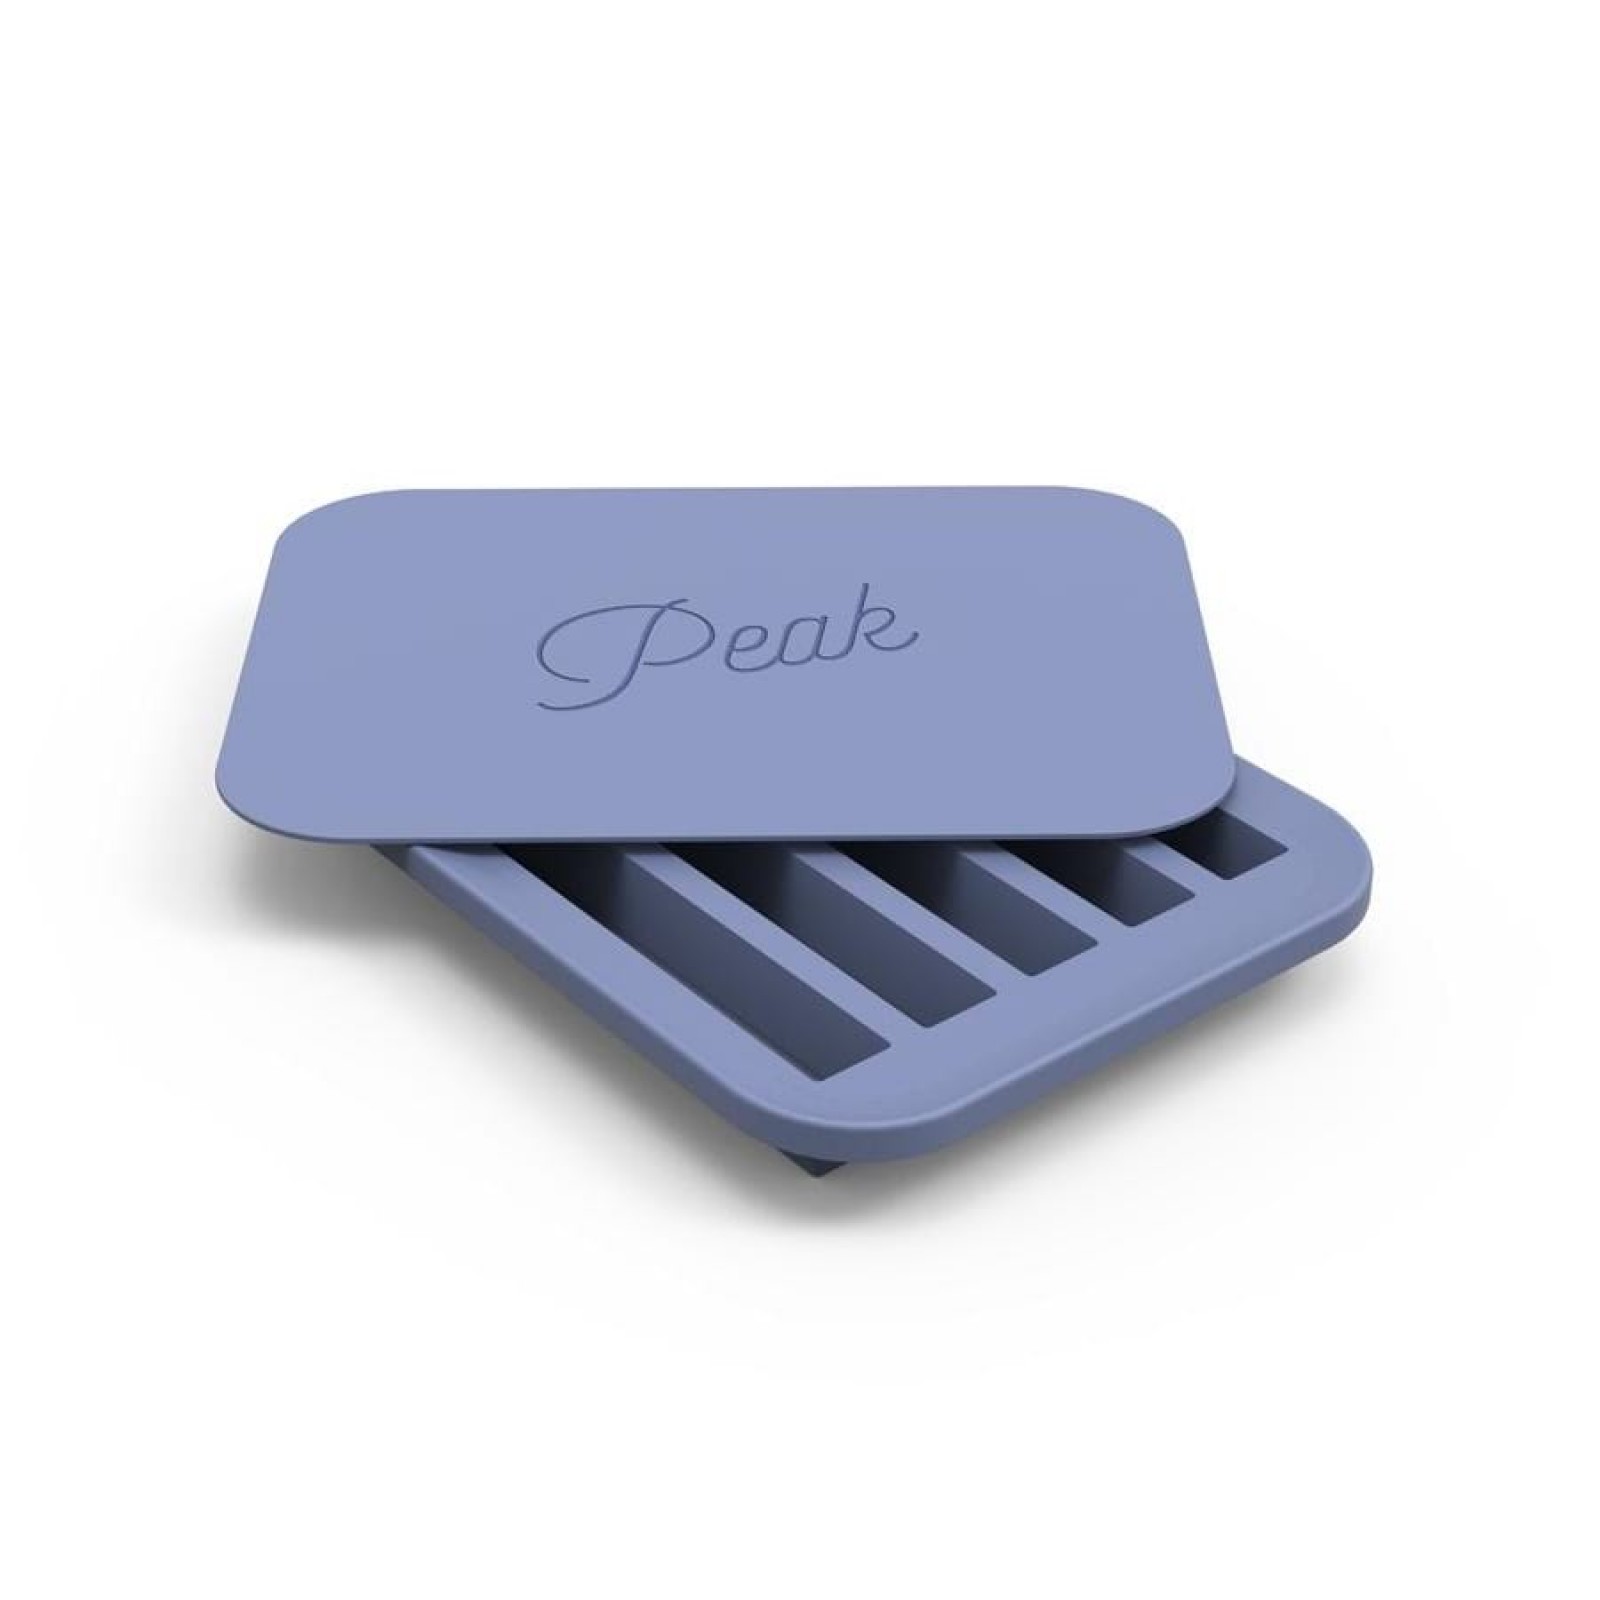 W P Water Bottle Ice Tray Peak Blue Design Is This